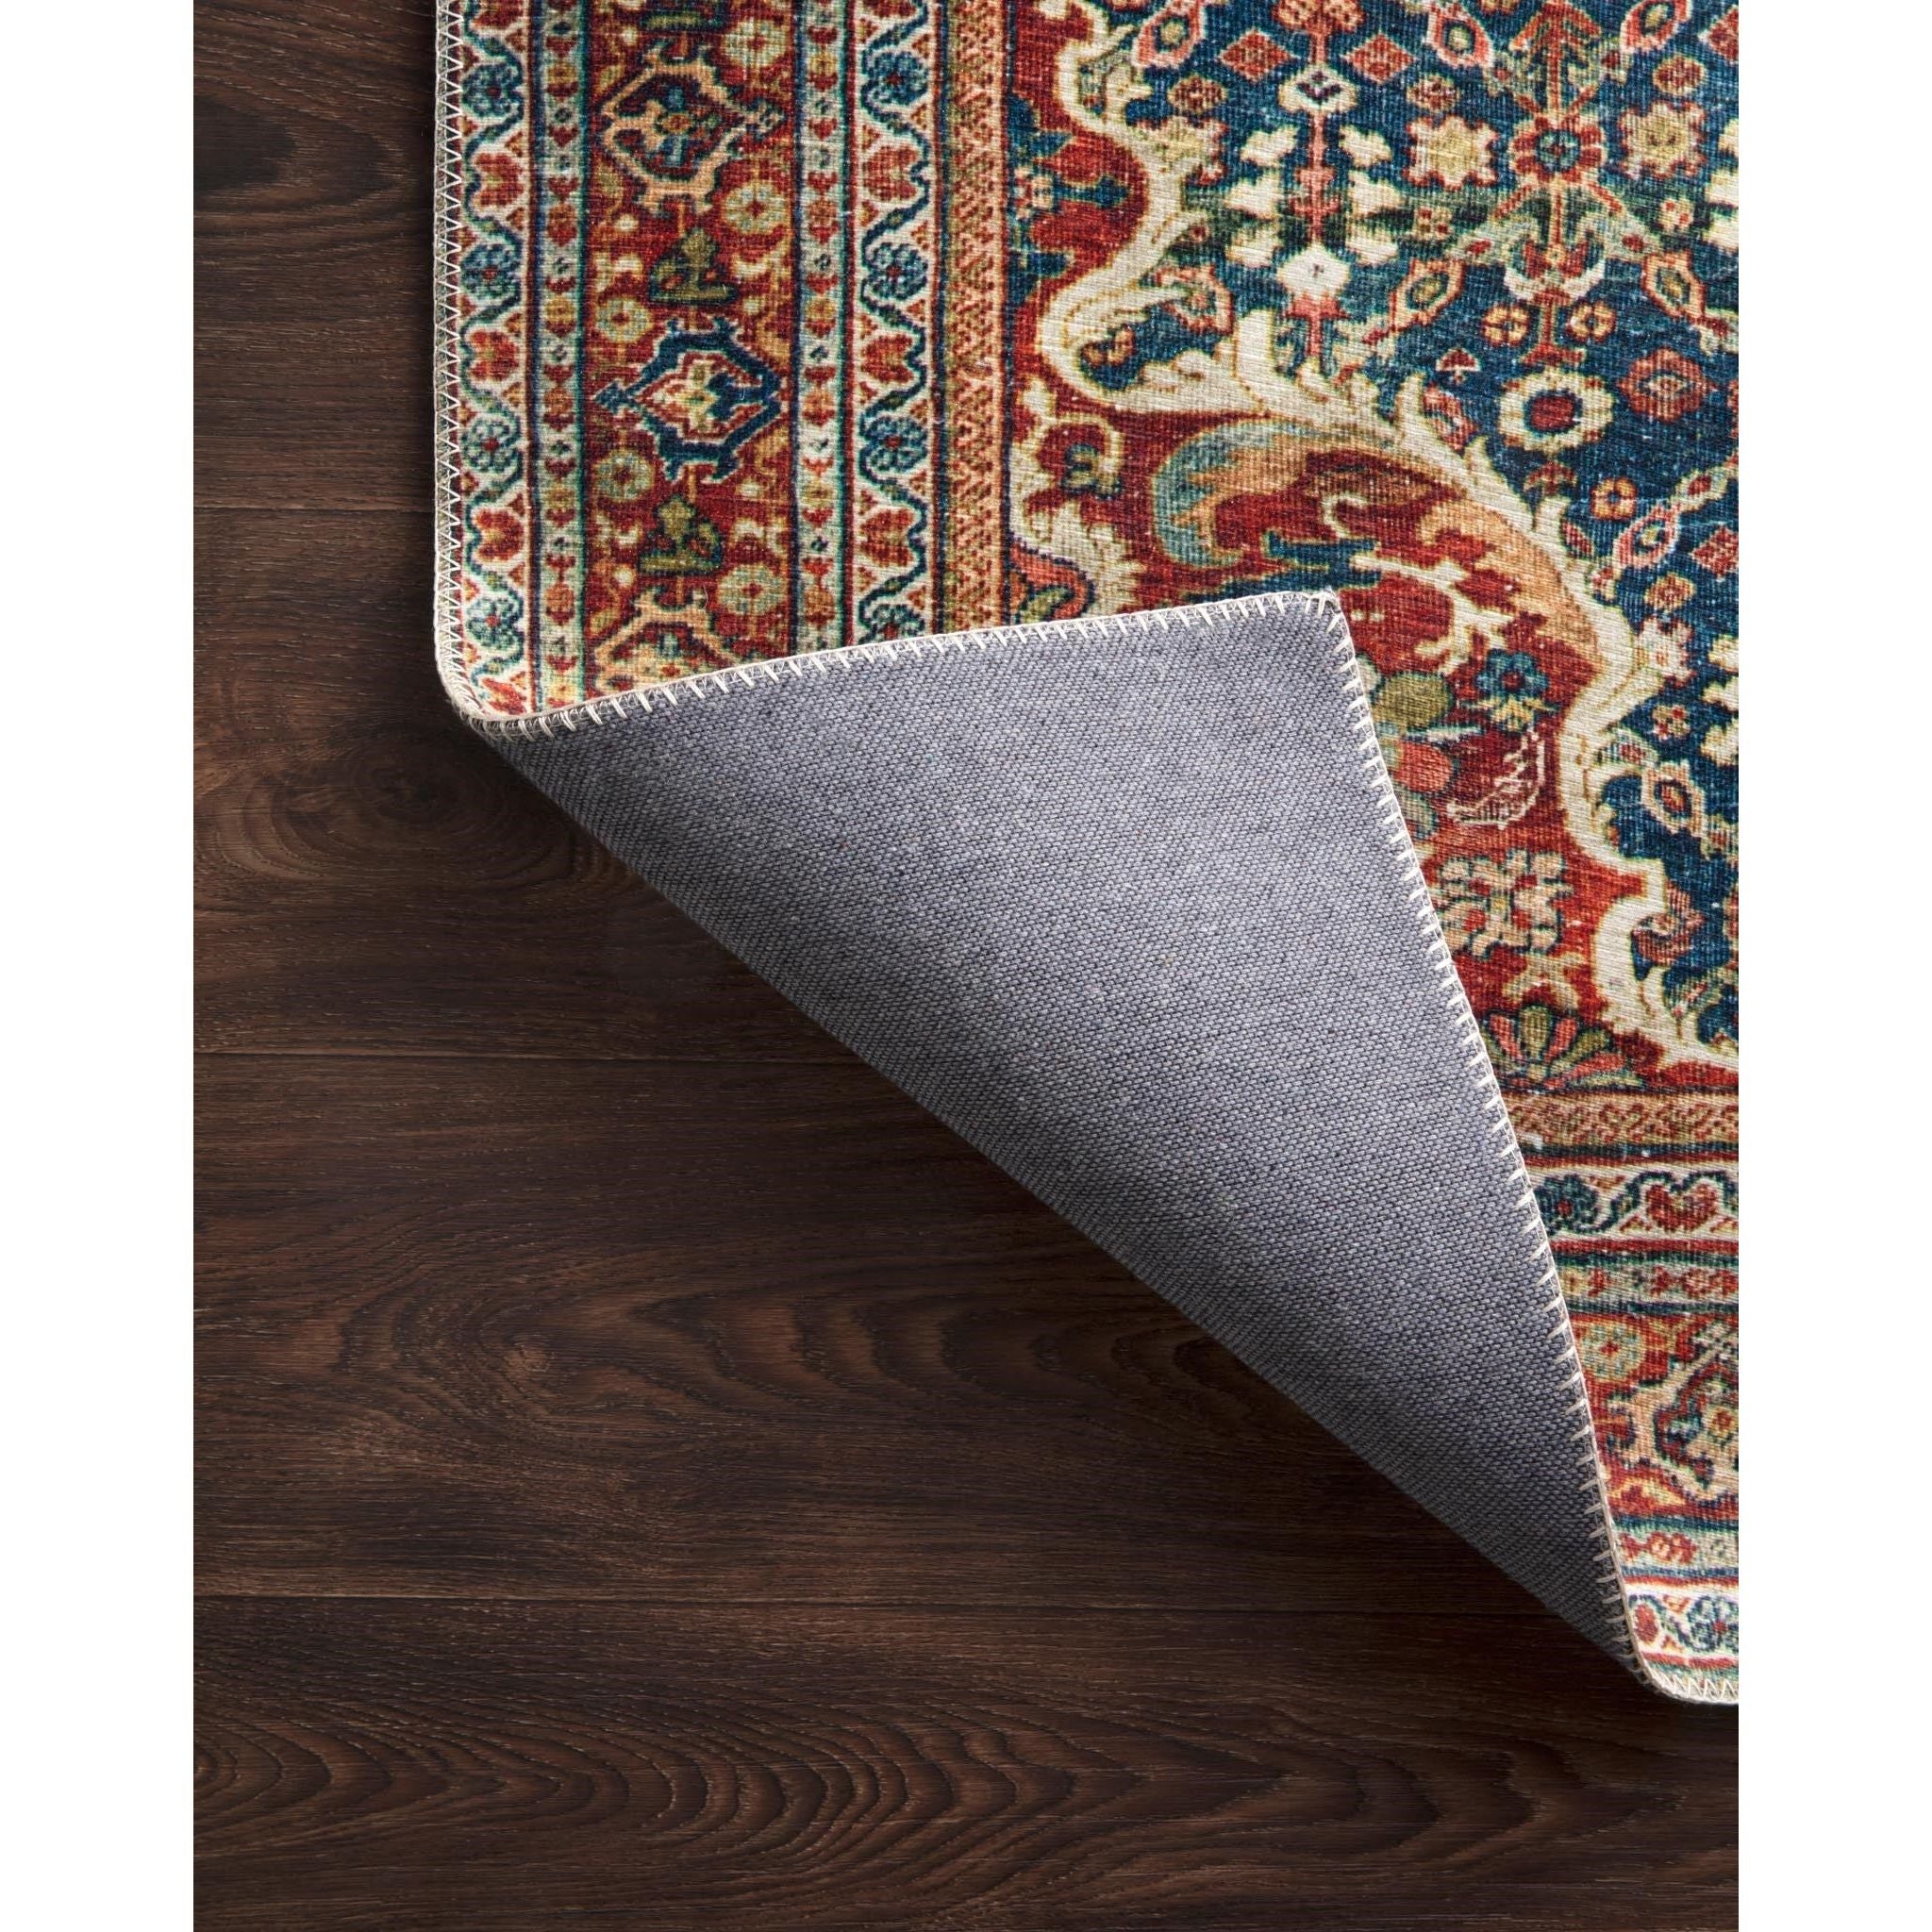 Perfect for families with kids and pets and very easy to clean and maintain. Comes in area, cute kitchen and hallway runners sizes. The rug is gorgeous with an intricate pattern and warms up the room with tones of blue, red, and ivory. The Layla Blue/Spice rug from Loloi captures the spirit of an old-world rug.